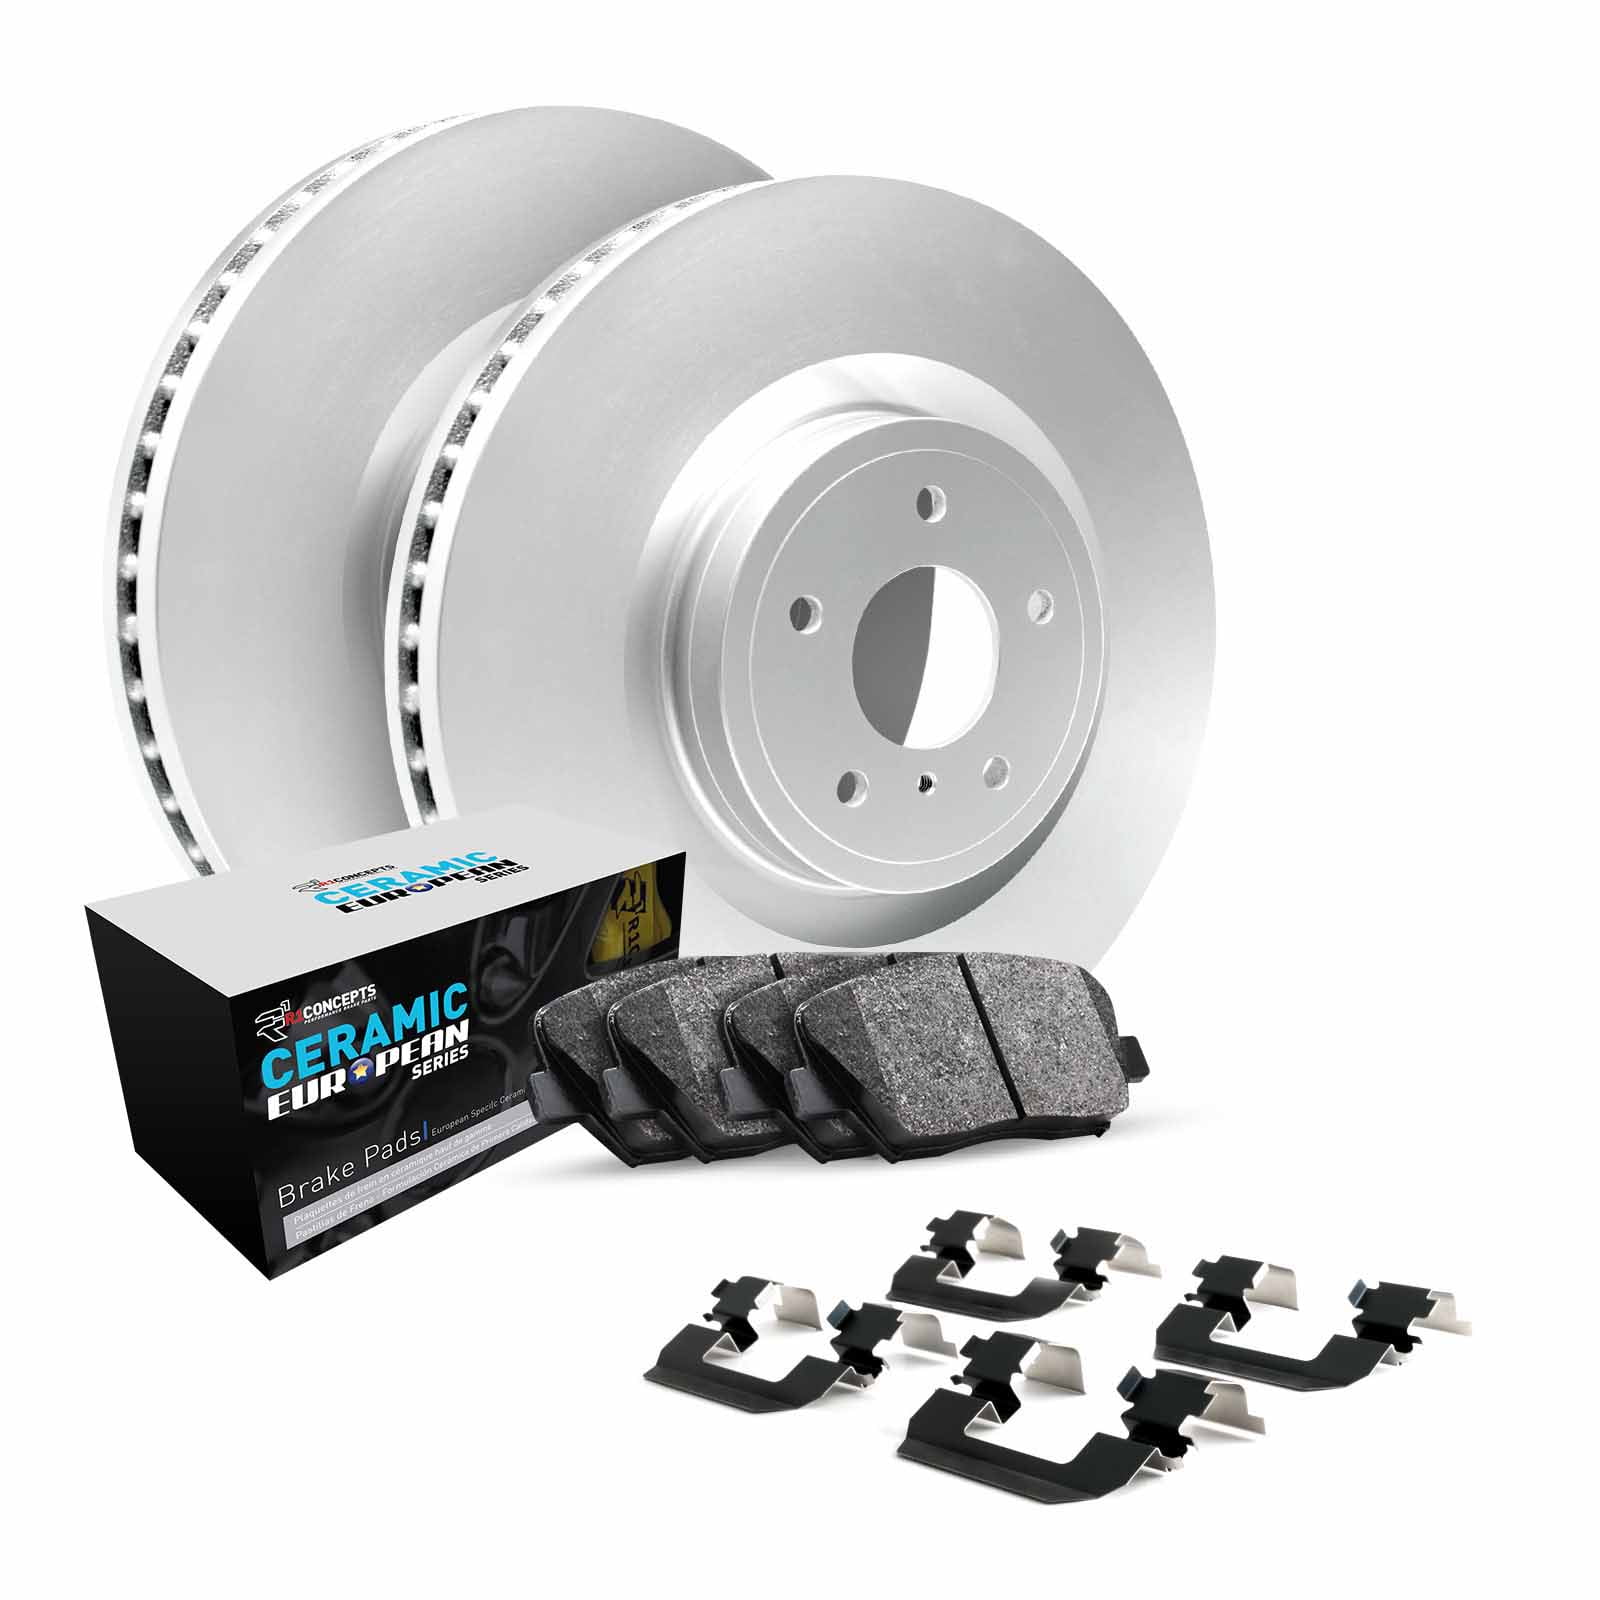 R1 Concepts Front Brakes and Rotors Kit |Front Brake Pads| Brake Rotors and  Pads| Euro Ceramic Brake Pads and Rotors| Hardware Kit WDTH1-54001並行輸入 